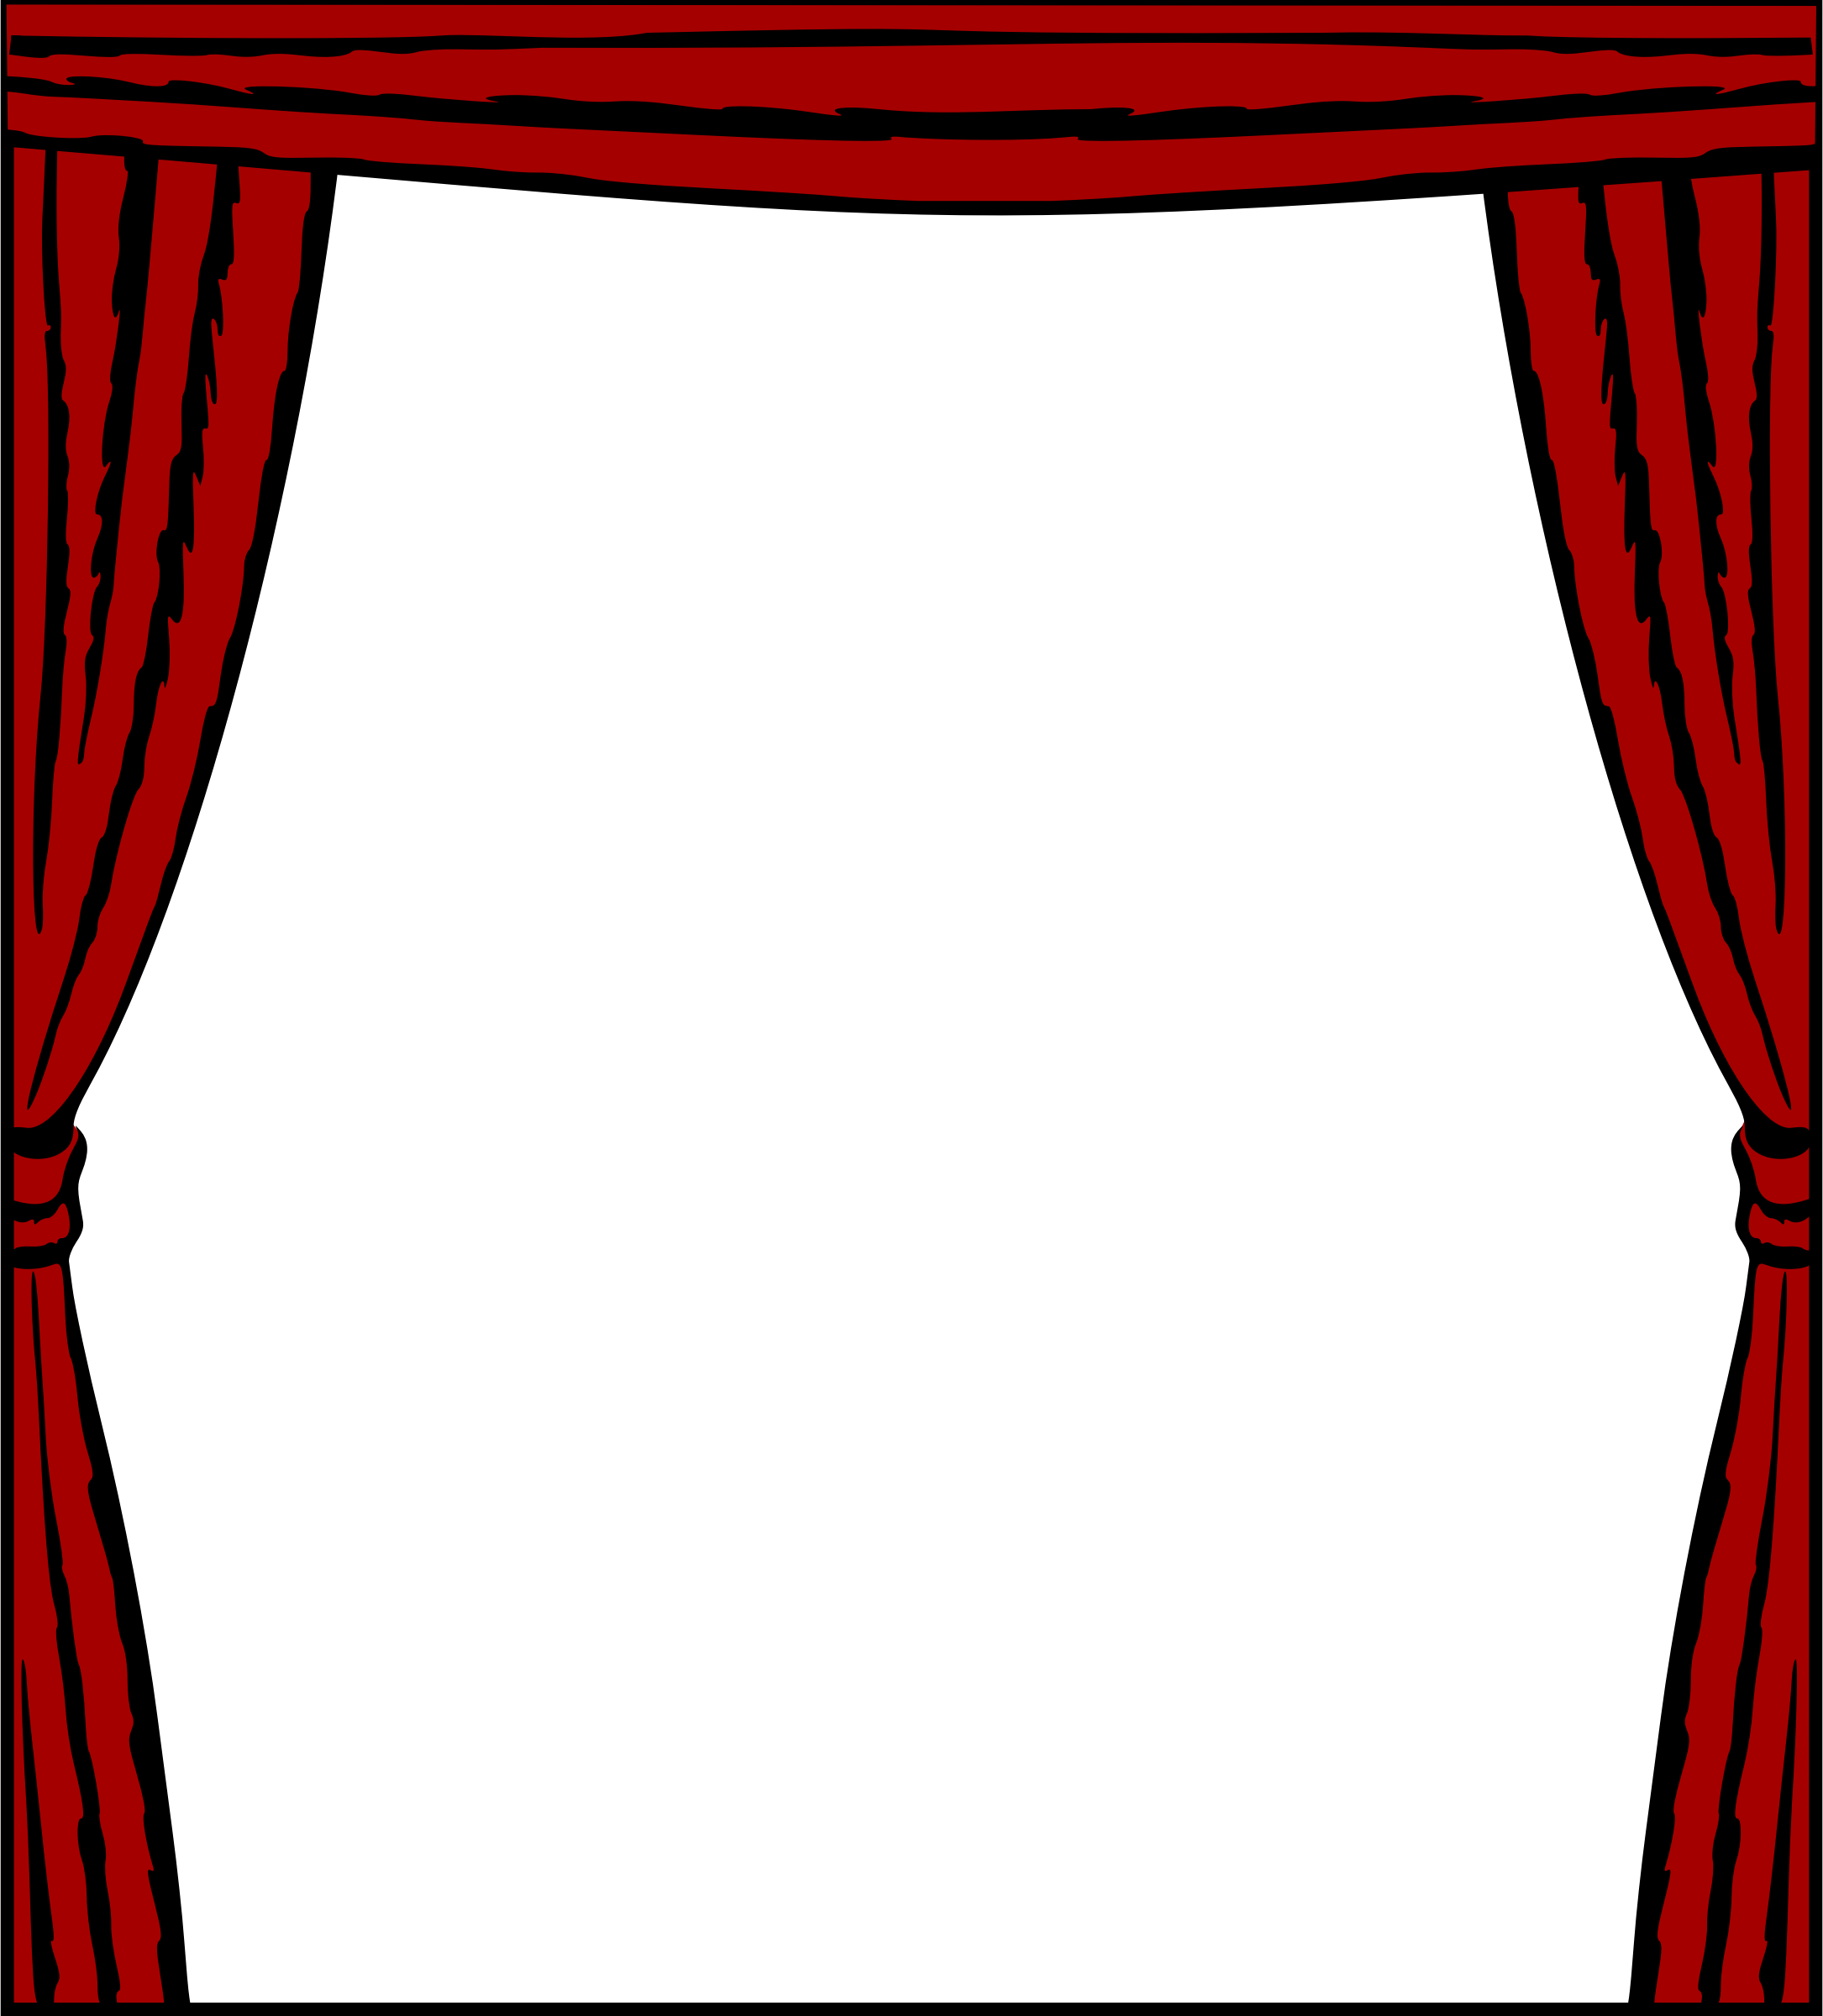 curtain clipart stage